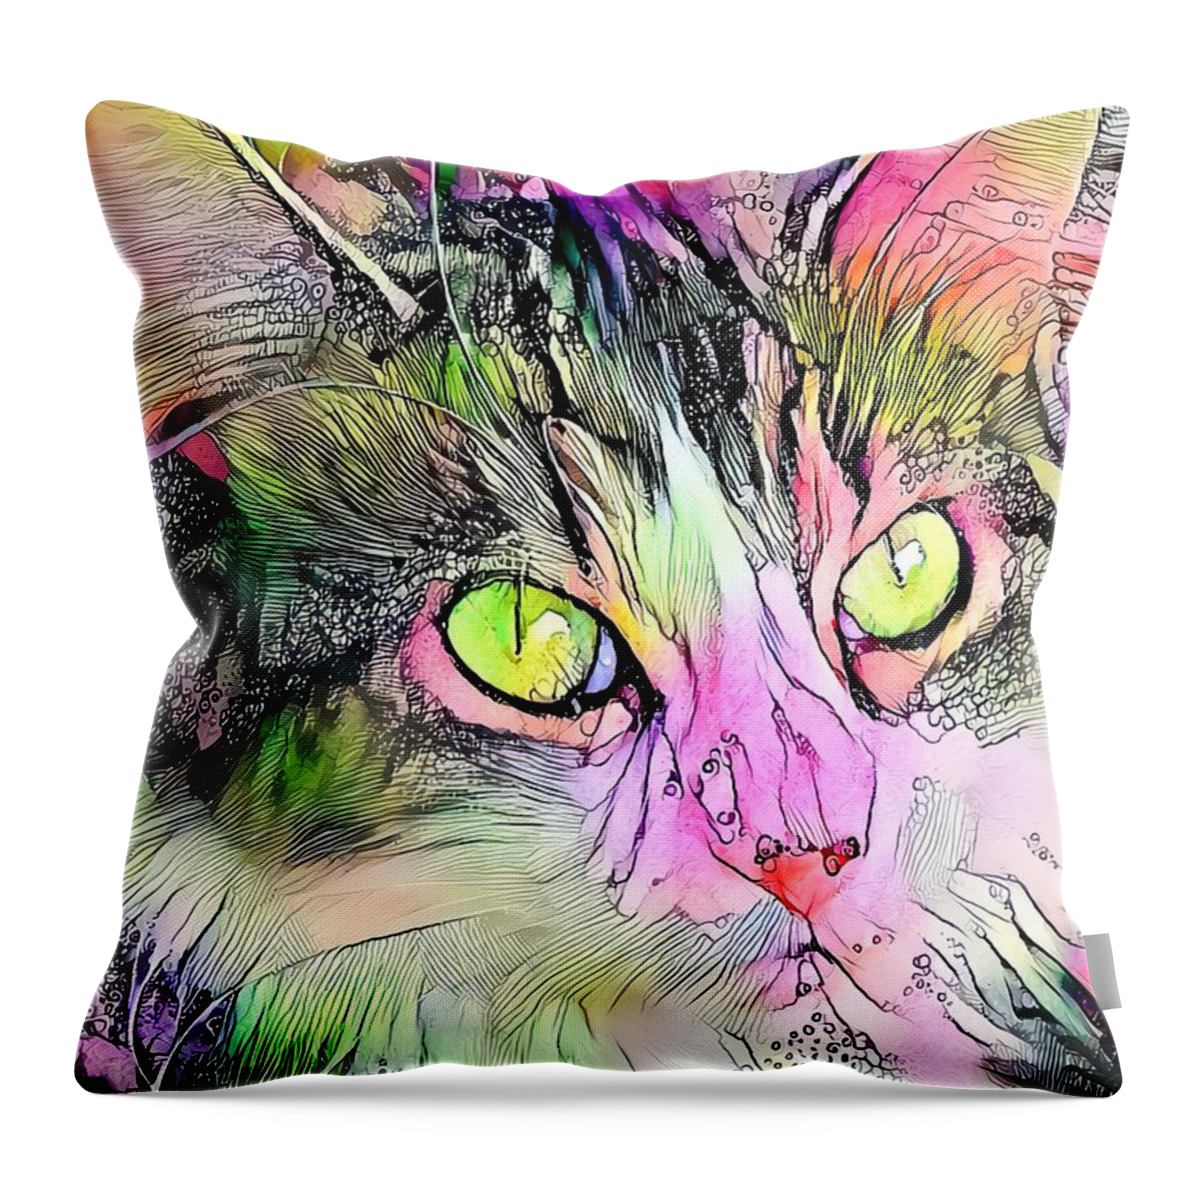 Watercolor. Green Throw Pillow featuring the digital art Stunning Watercolor Cat Face Green Eyes by Don Northup